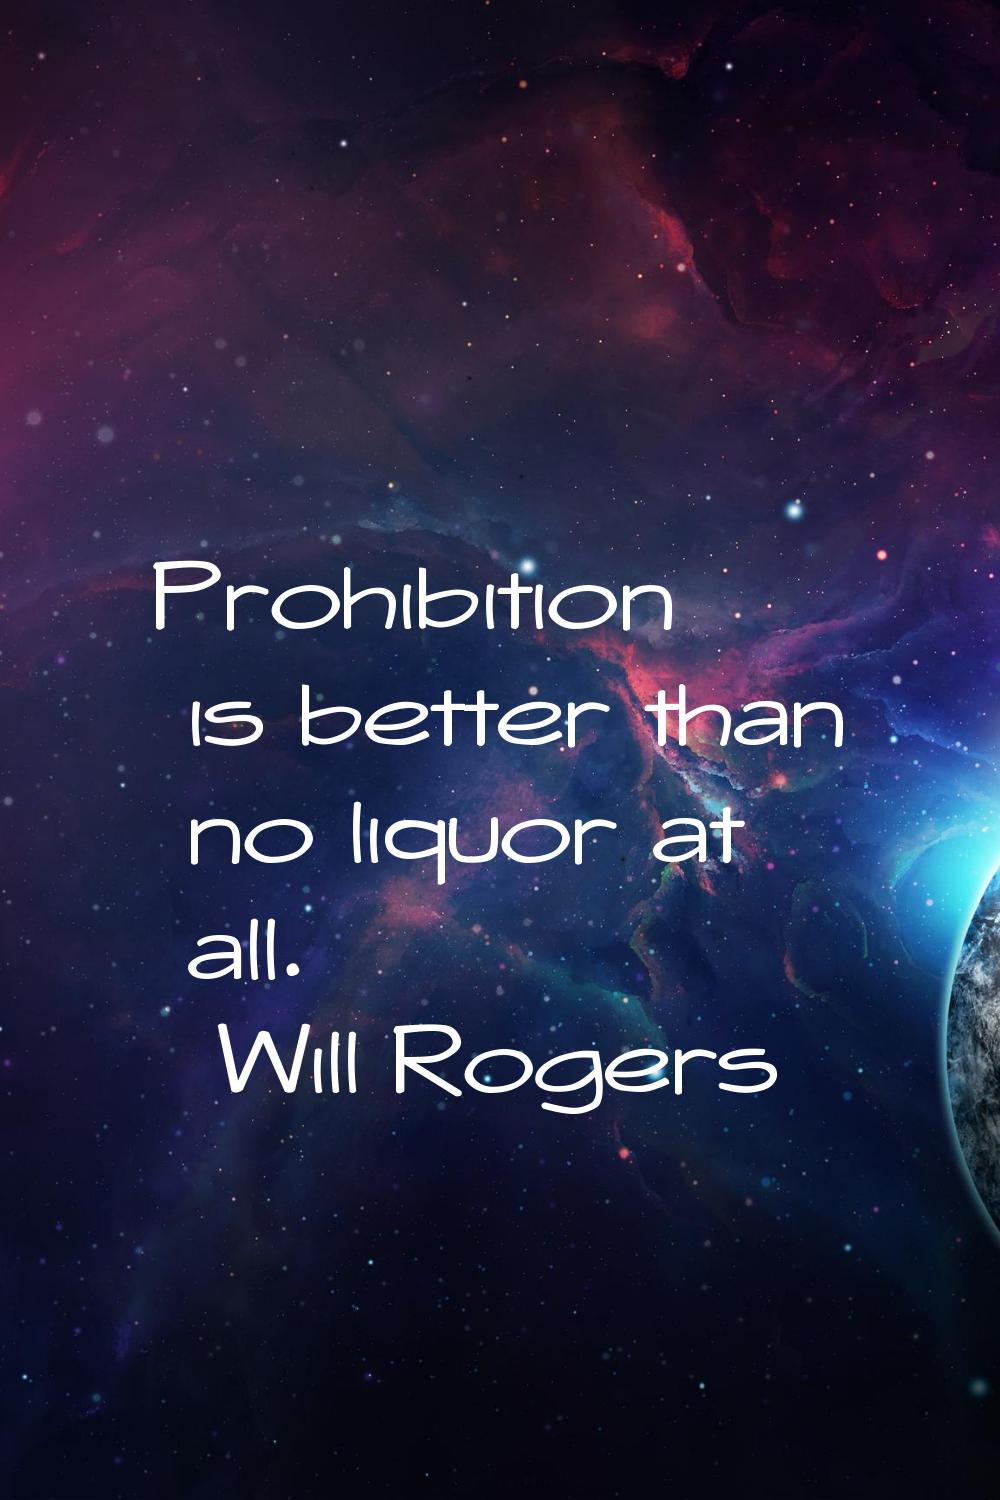 Prohibition is better than no liquor at all.